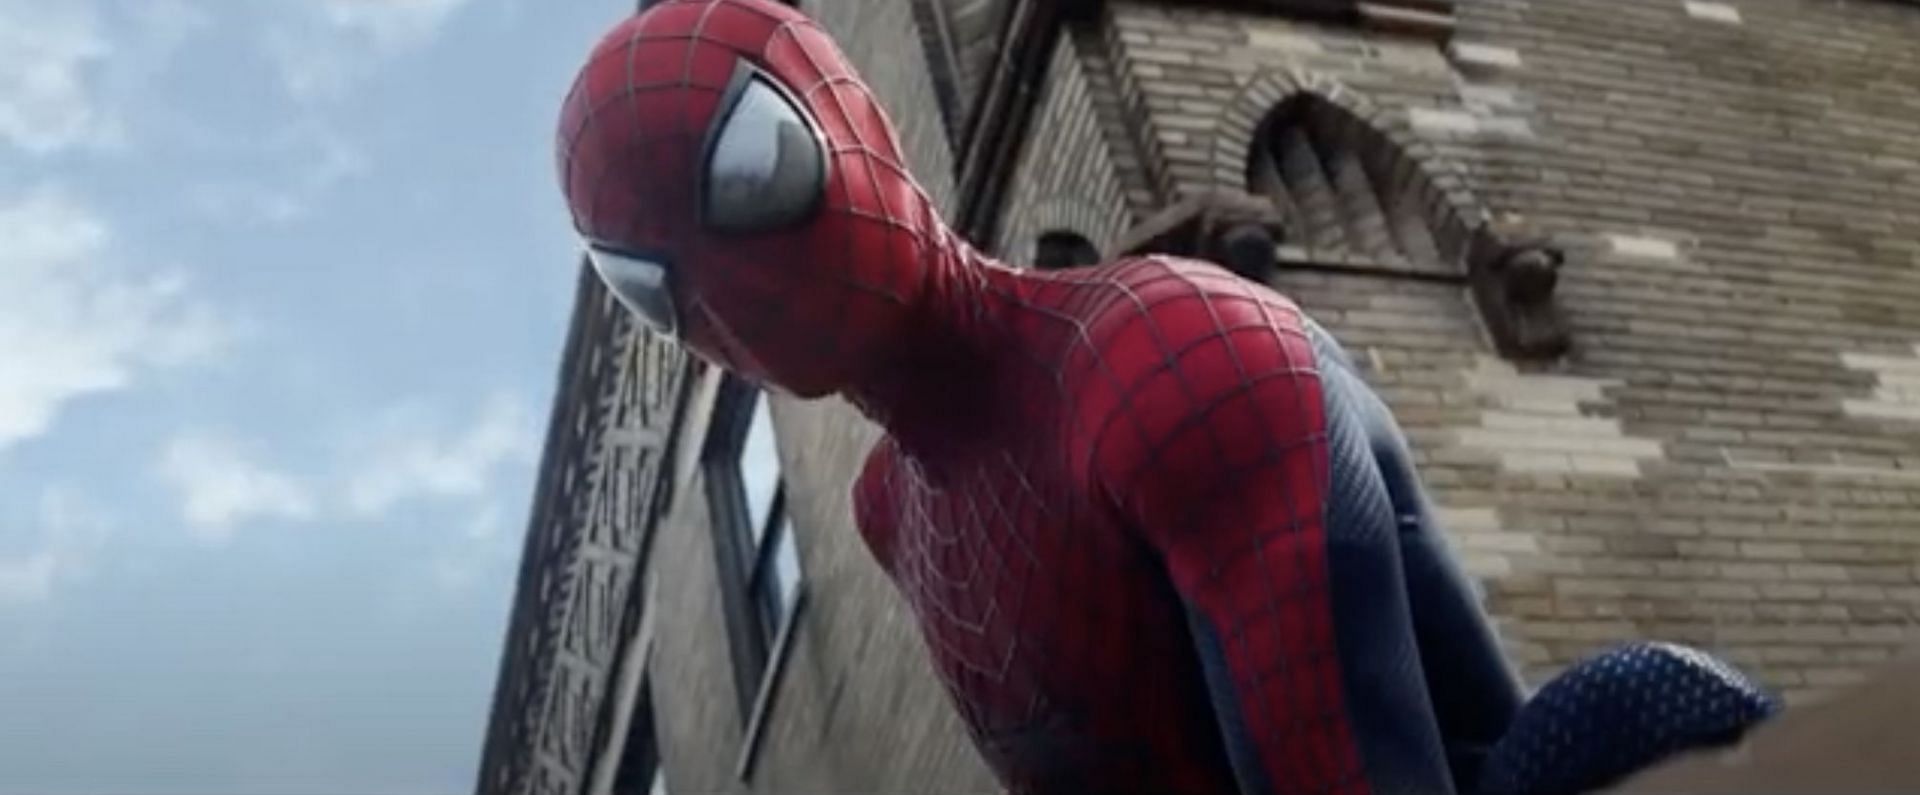 The Spider-Man suit in the film (Image via Sony)